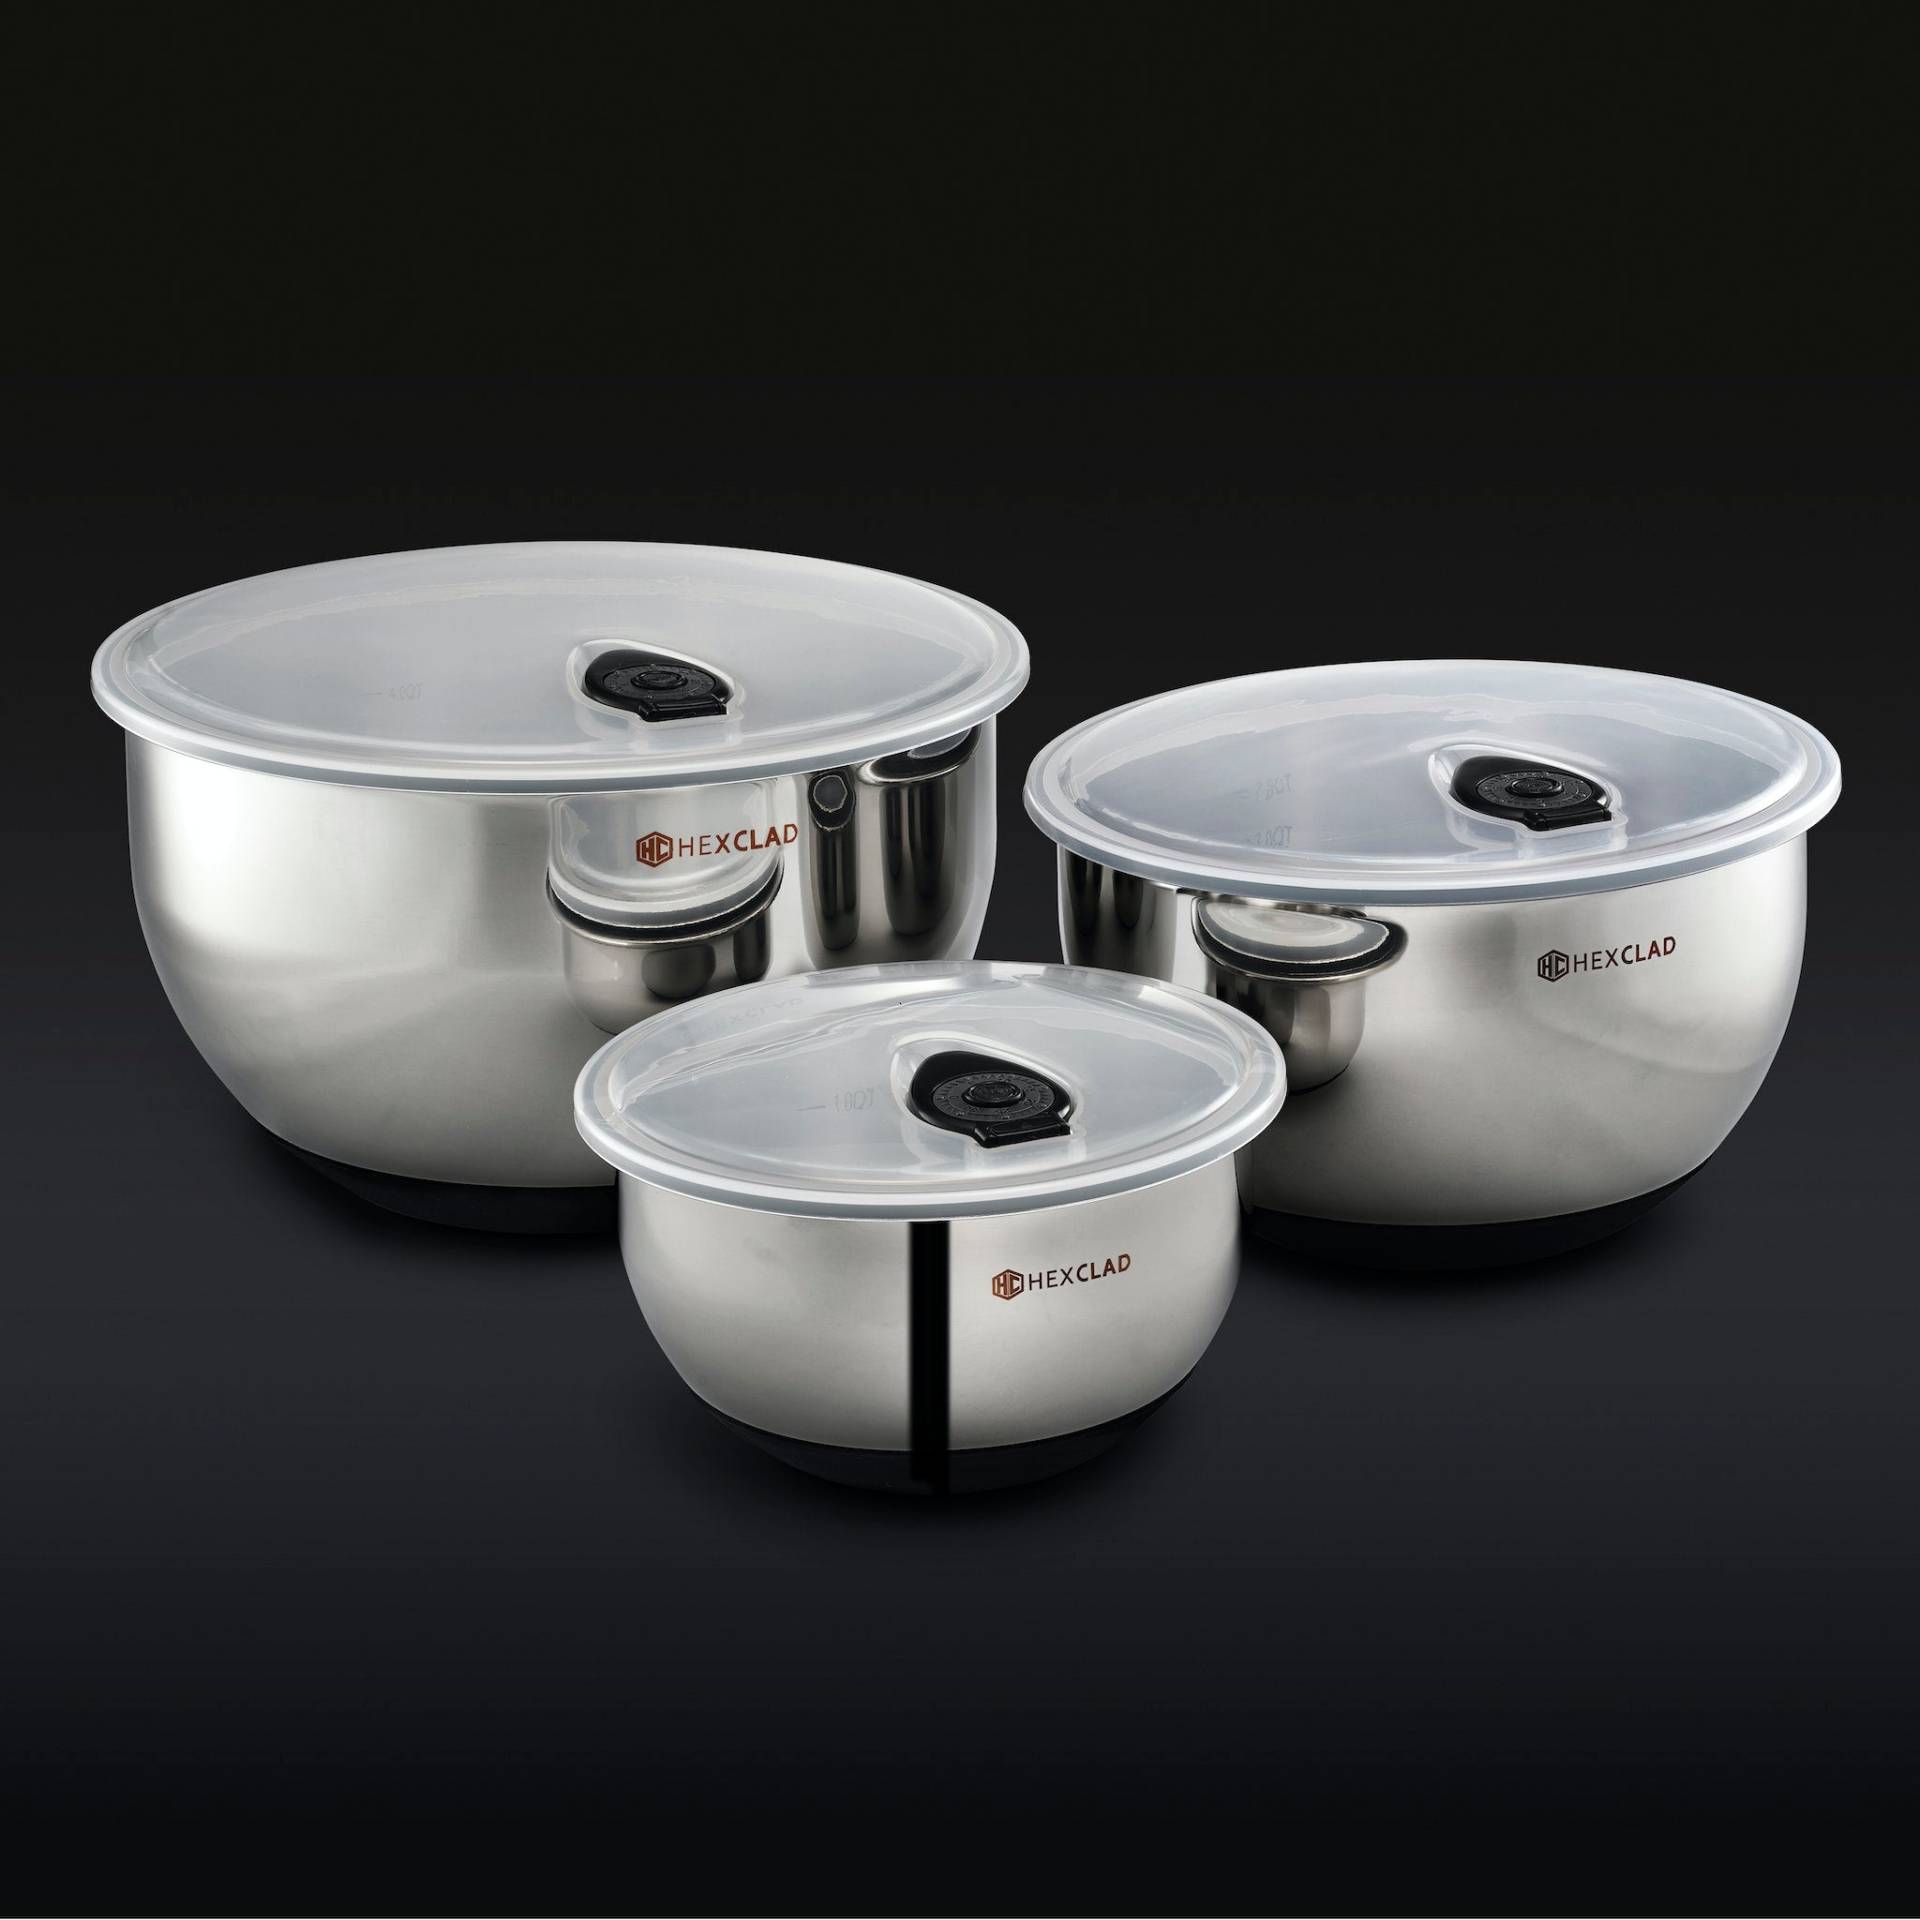 Hexclad Vacuum Seal Stainless Steel Mixing and Storage Bowls